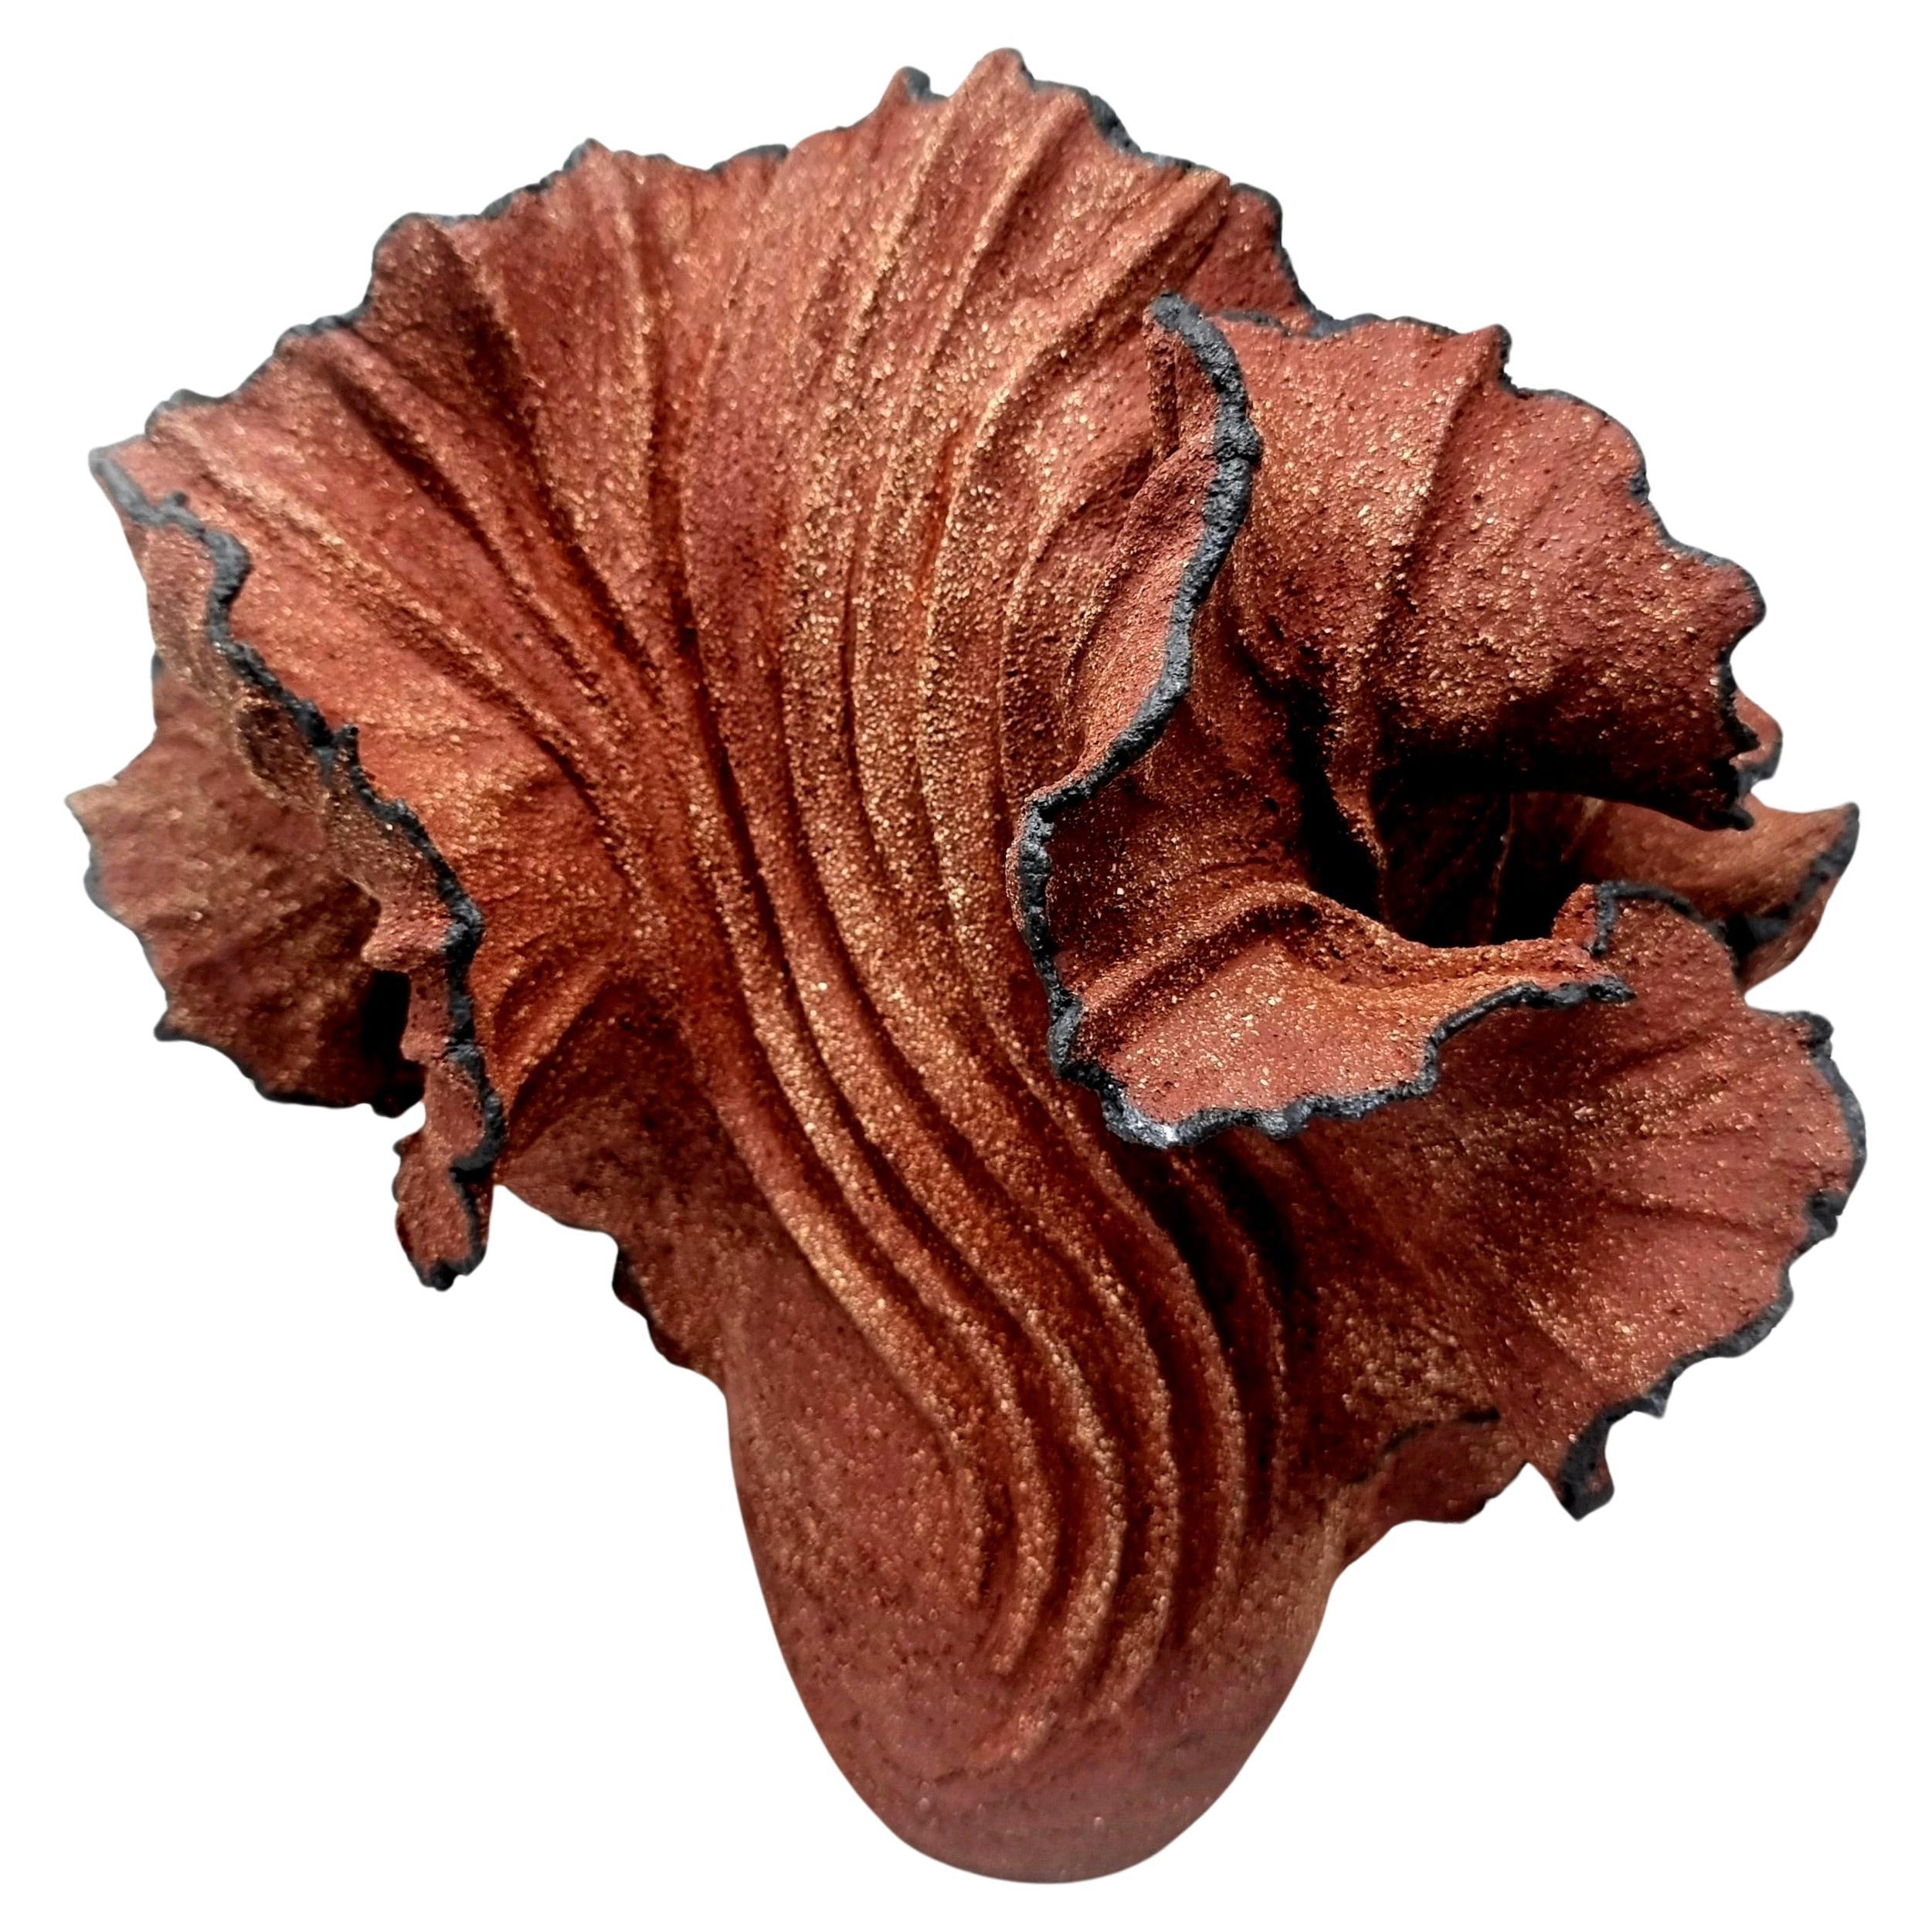 Handbuilt Stonewear Sculpture in red/braun stonewear clay

It is sculpted by hand, slowly adding coils and clay to create the final result. This is a piece of art based on classic sculpting methods. 
 
The color of the sculpture hcanges depending on